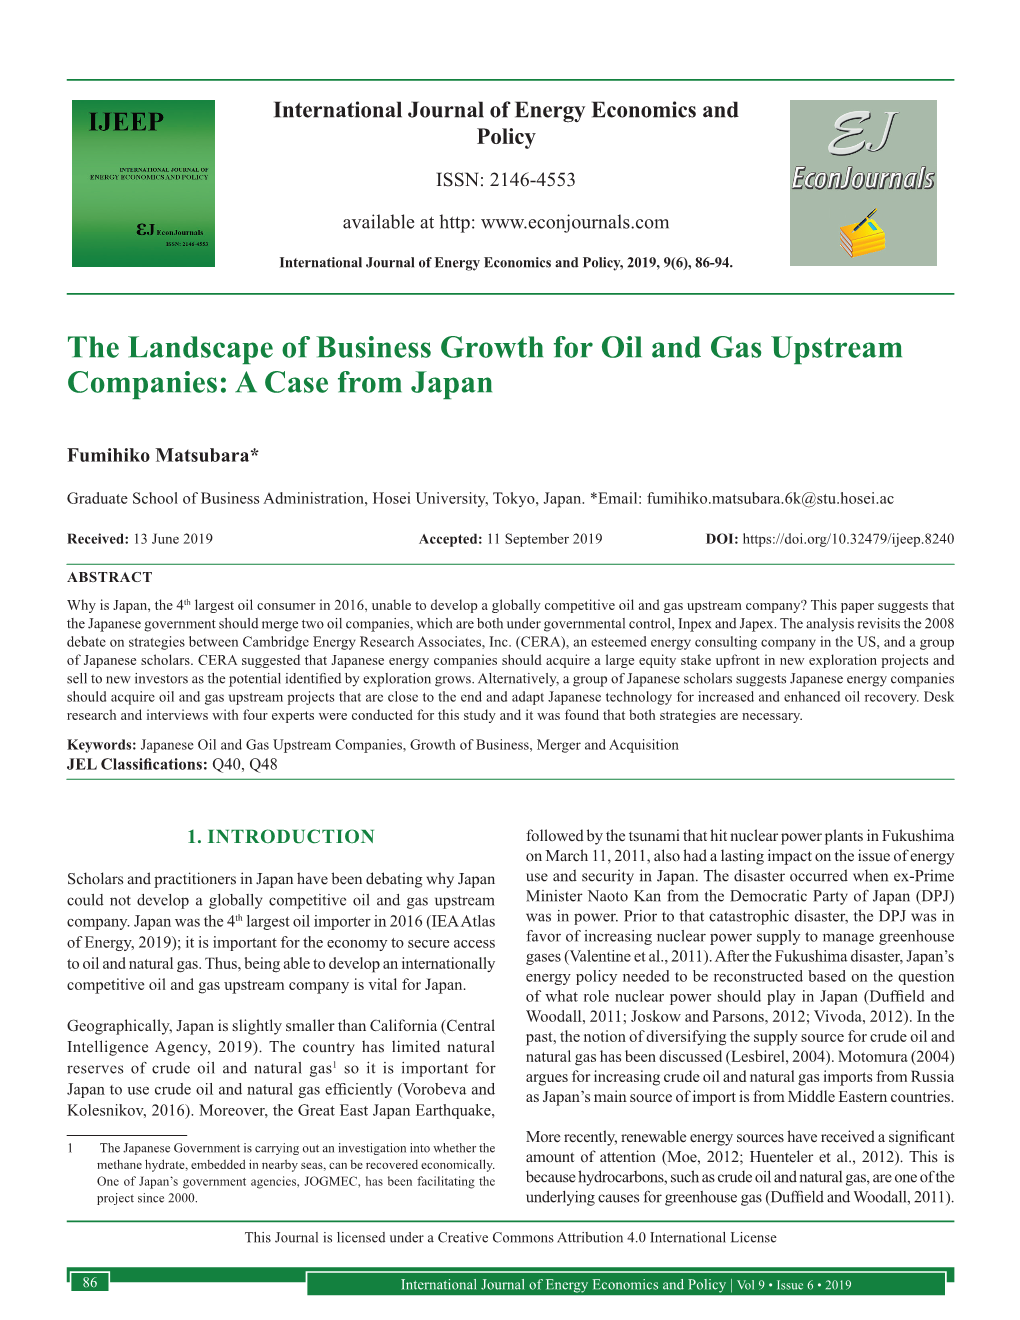 The Landscape of Business Growth for Oil and Gas Upstream Companies: a Case from Japan